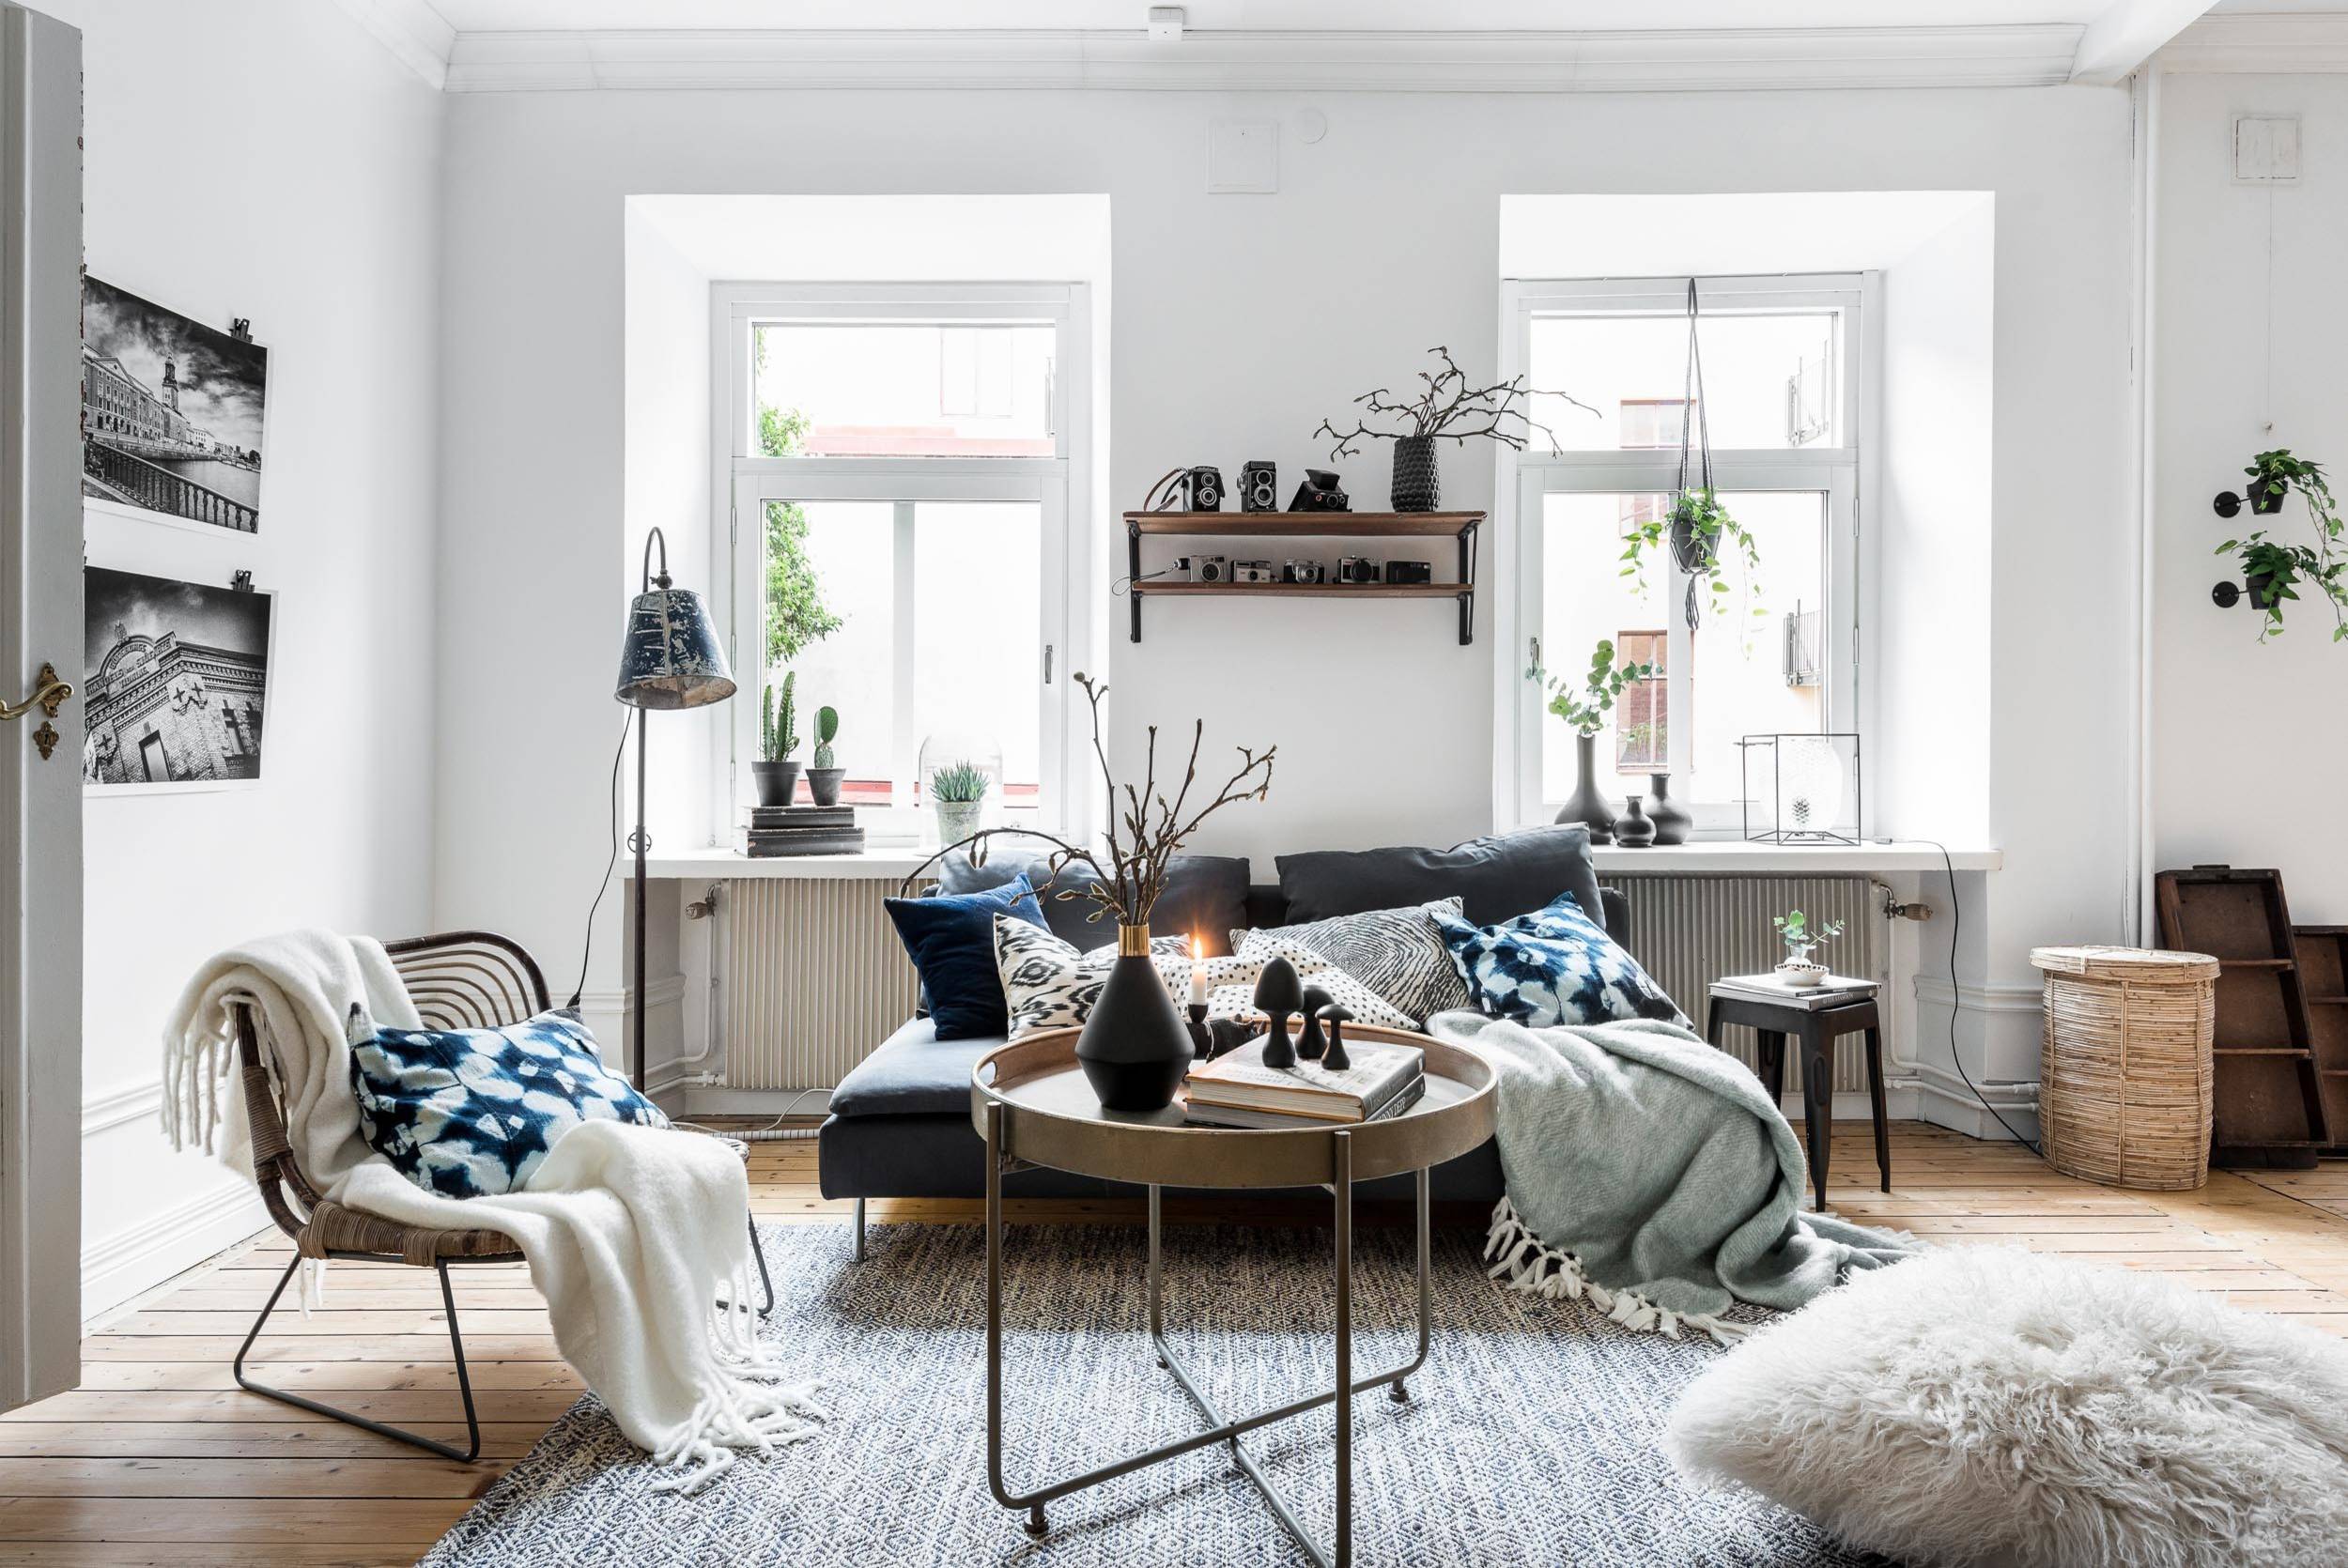 Tips for Embracing "Hygge" in Your Home: Comfort and Coziness